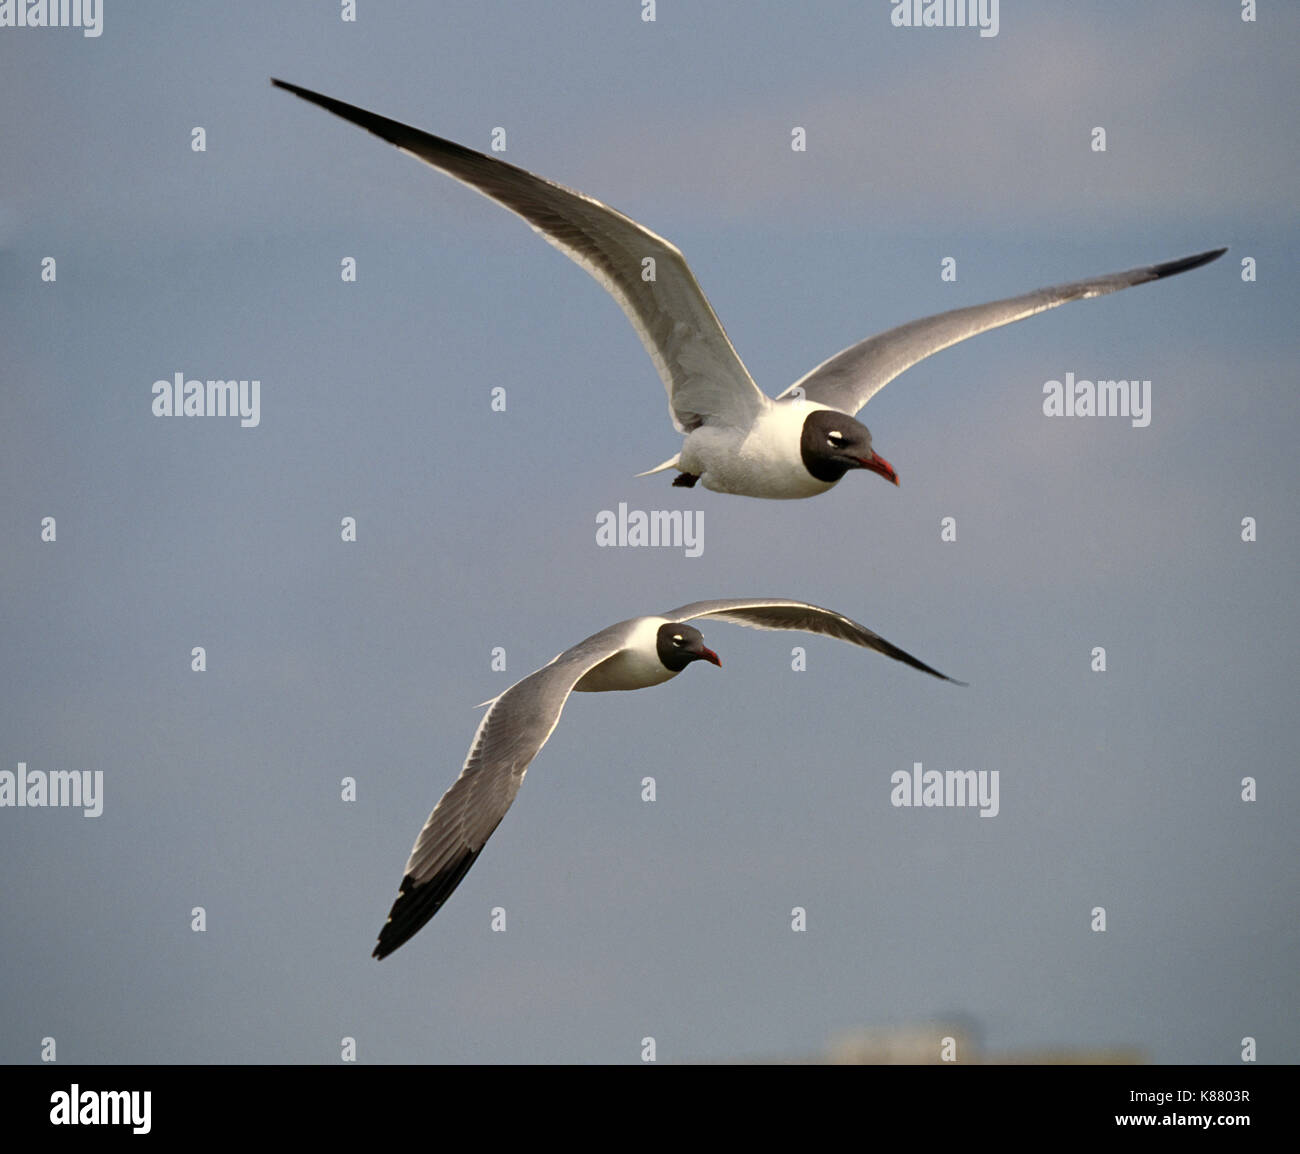 Portrait of two laughing gull, Leucophaeus atricilla, a common sea gull of the Gulf of Mexico coast. Stock Photo